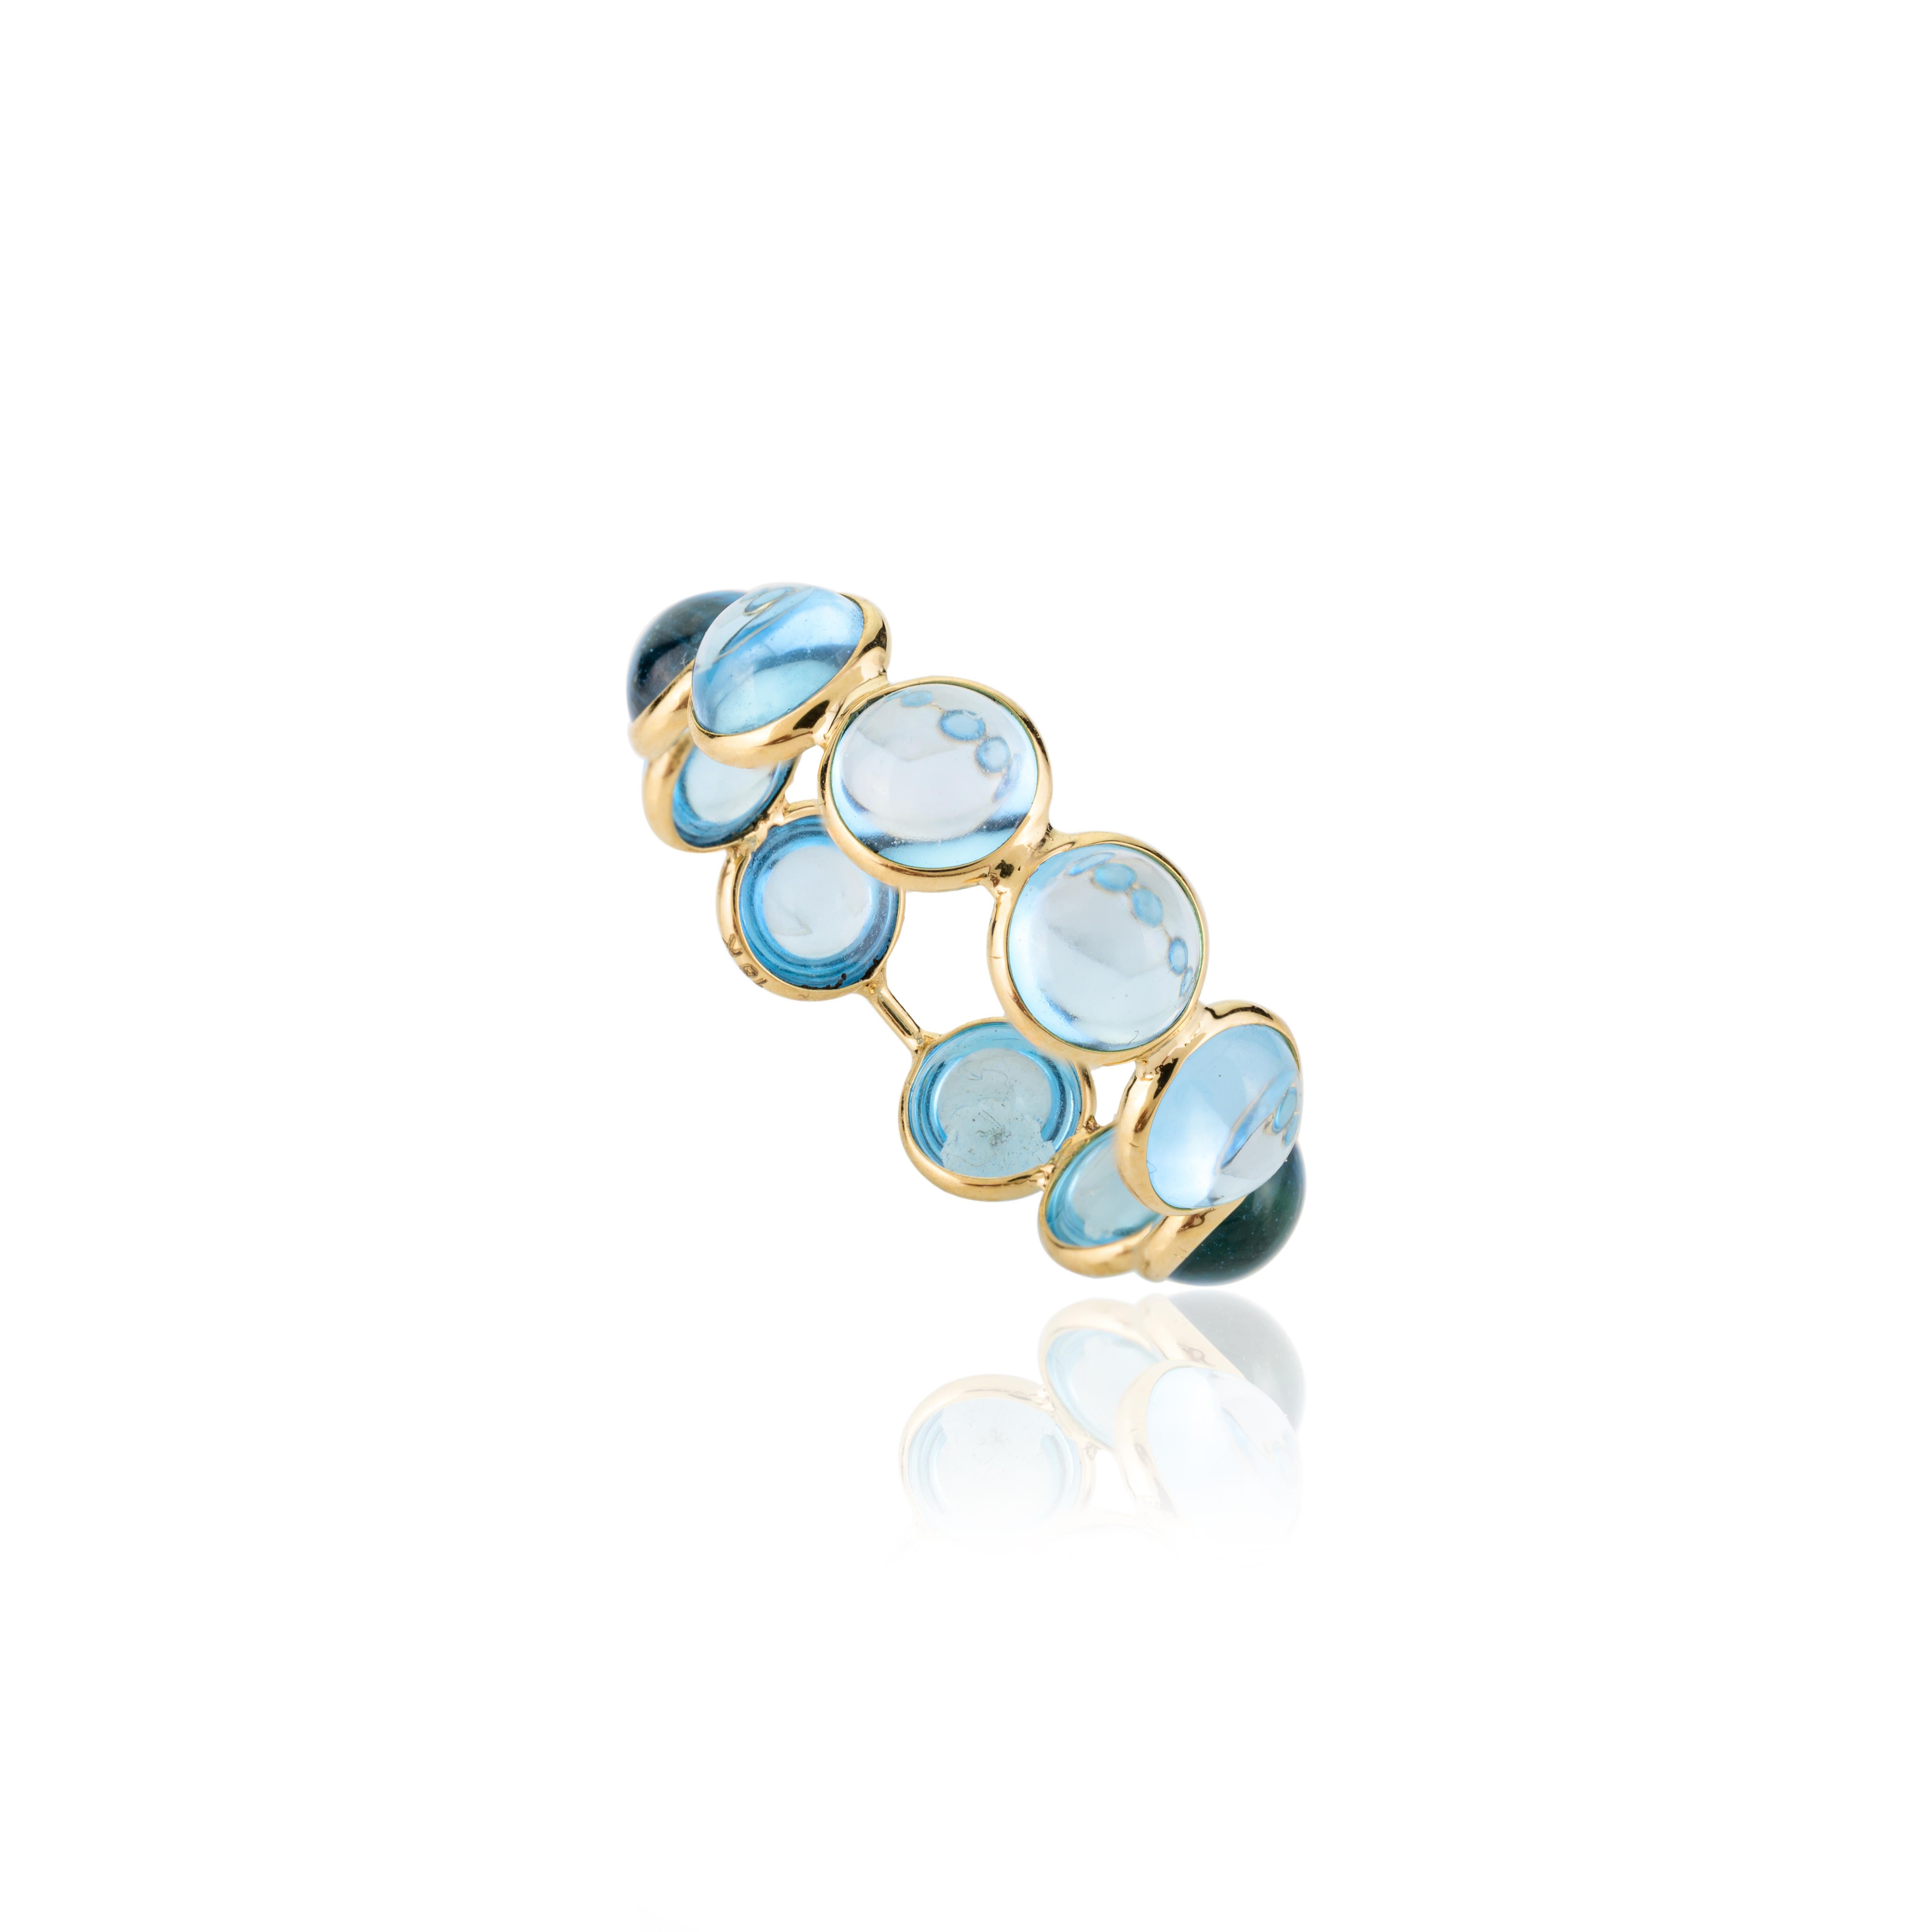 For Sale:  Round Cabochon Blue Topaz Eternity Band Ring Gift in 18k Solid Yellow Gold 7